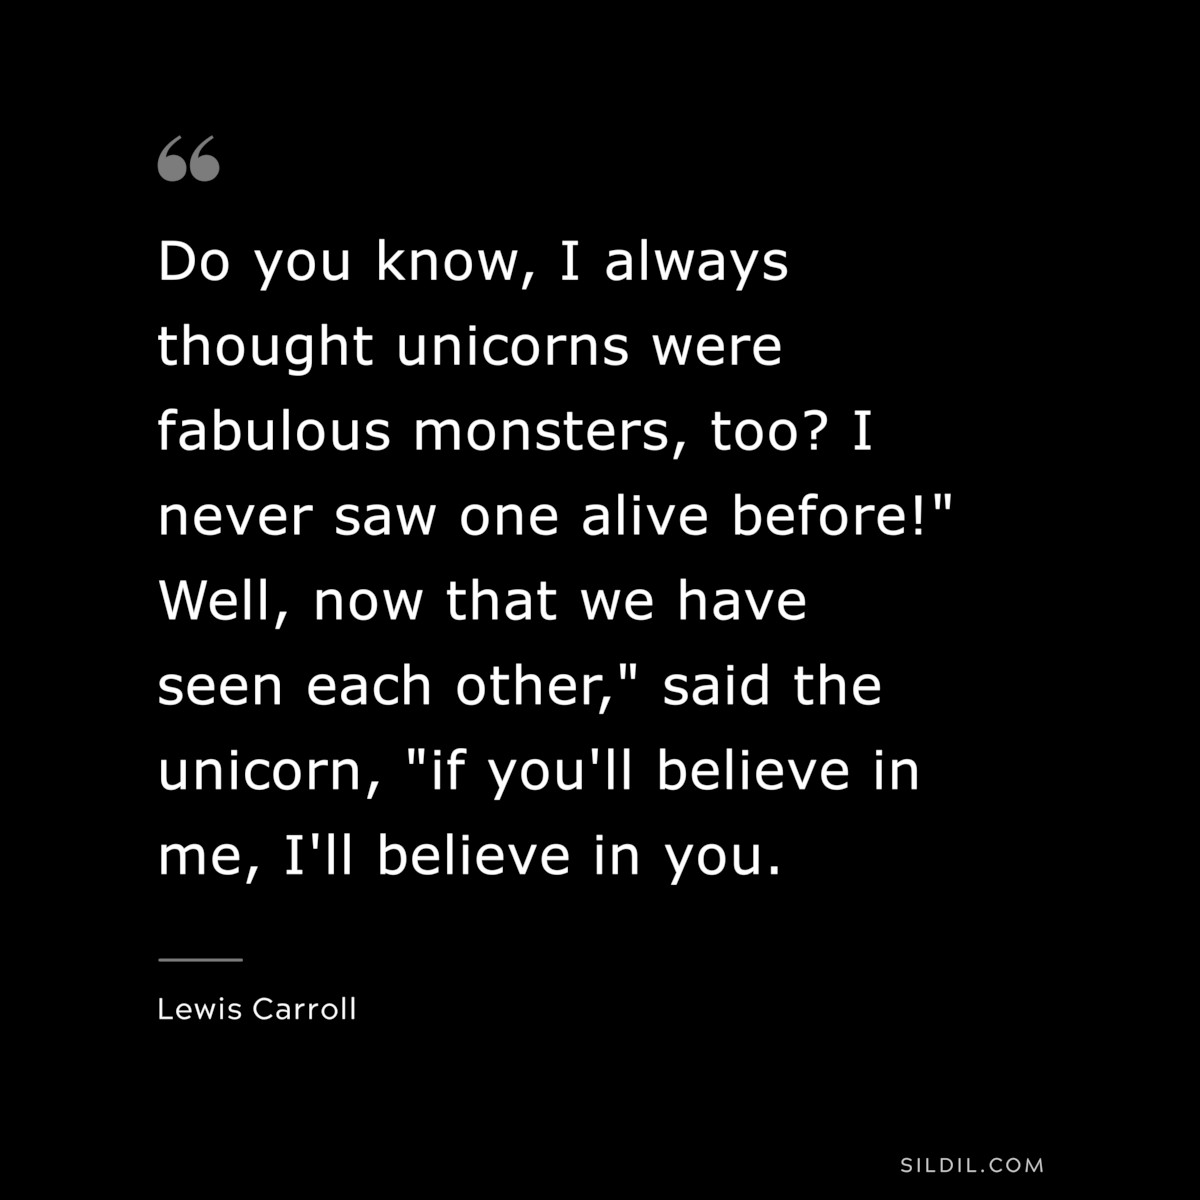 Do you know, I always thought unicorns were fabulous monsters, too? I never saw one alive before!" Well, now that we have seen each other," said the unicorn, "if you'll believe in me, I'll believe in you.